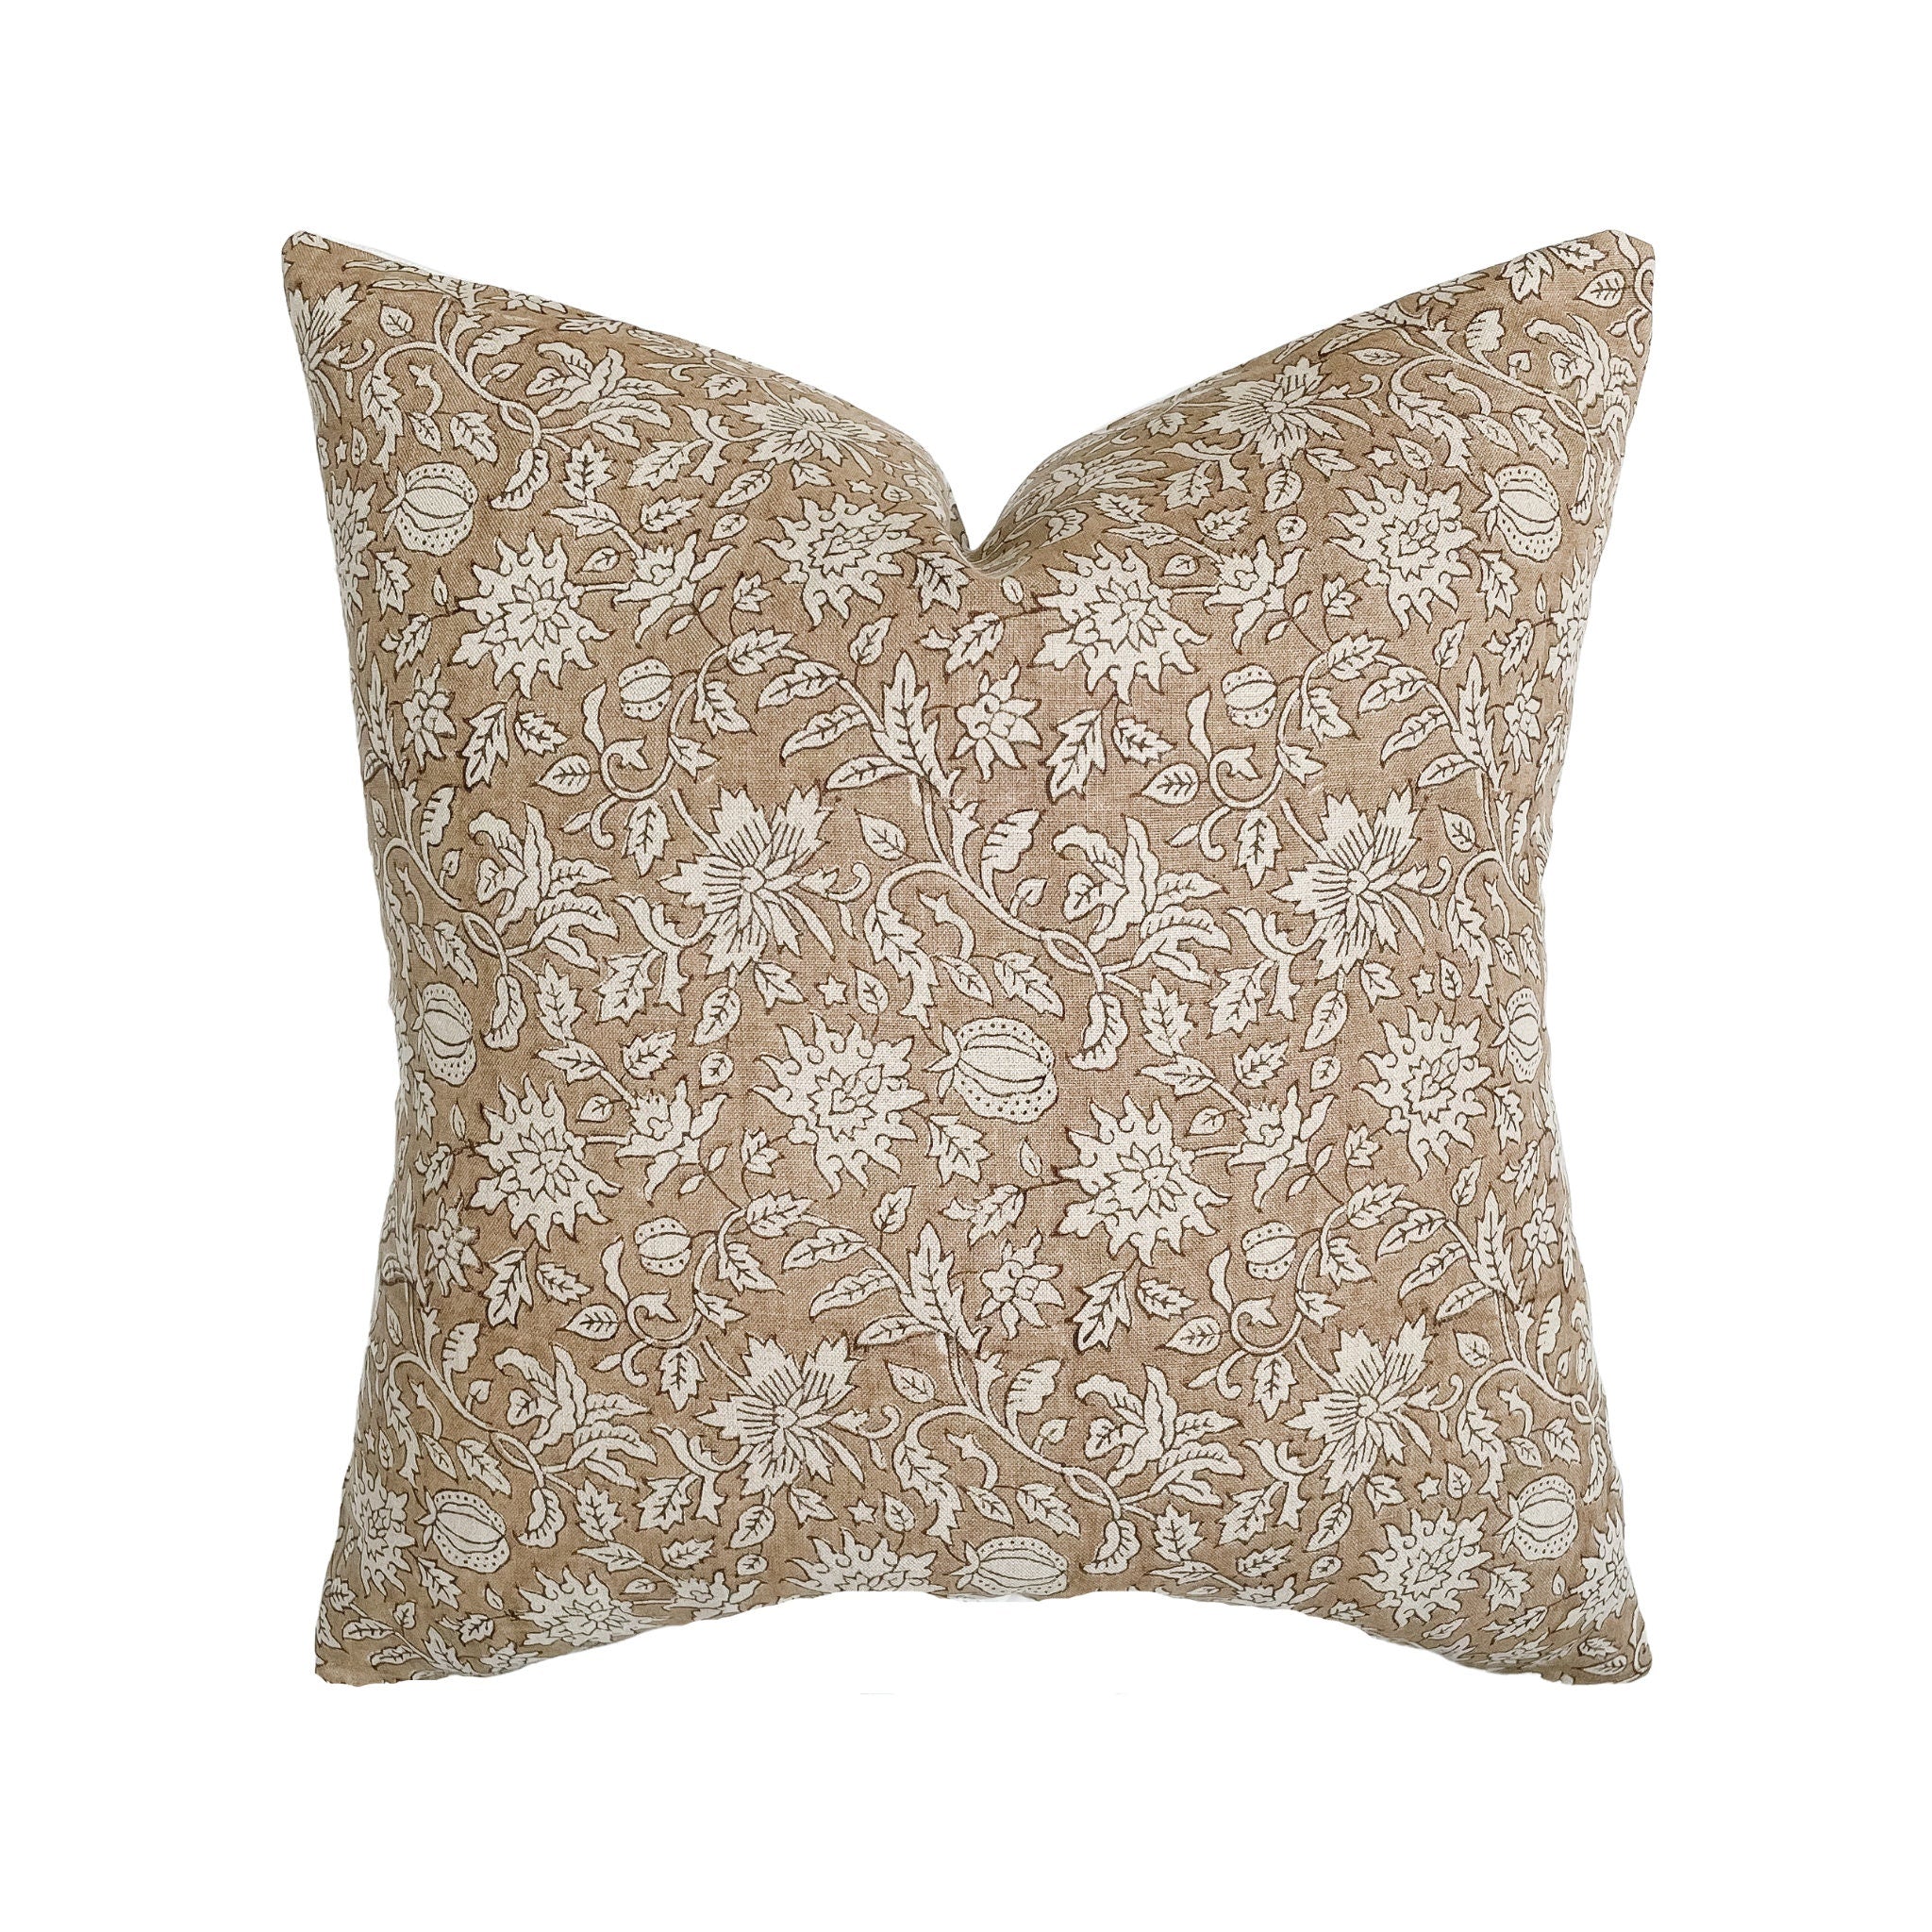 Beige Floral Pillow Cover, Fall Pillow Cover 18x18, Modern Floral Pillow  Covers, Neutral Throw Pillow Cover, Farmhouse Throw Pillow Cover